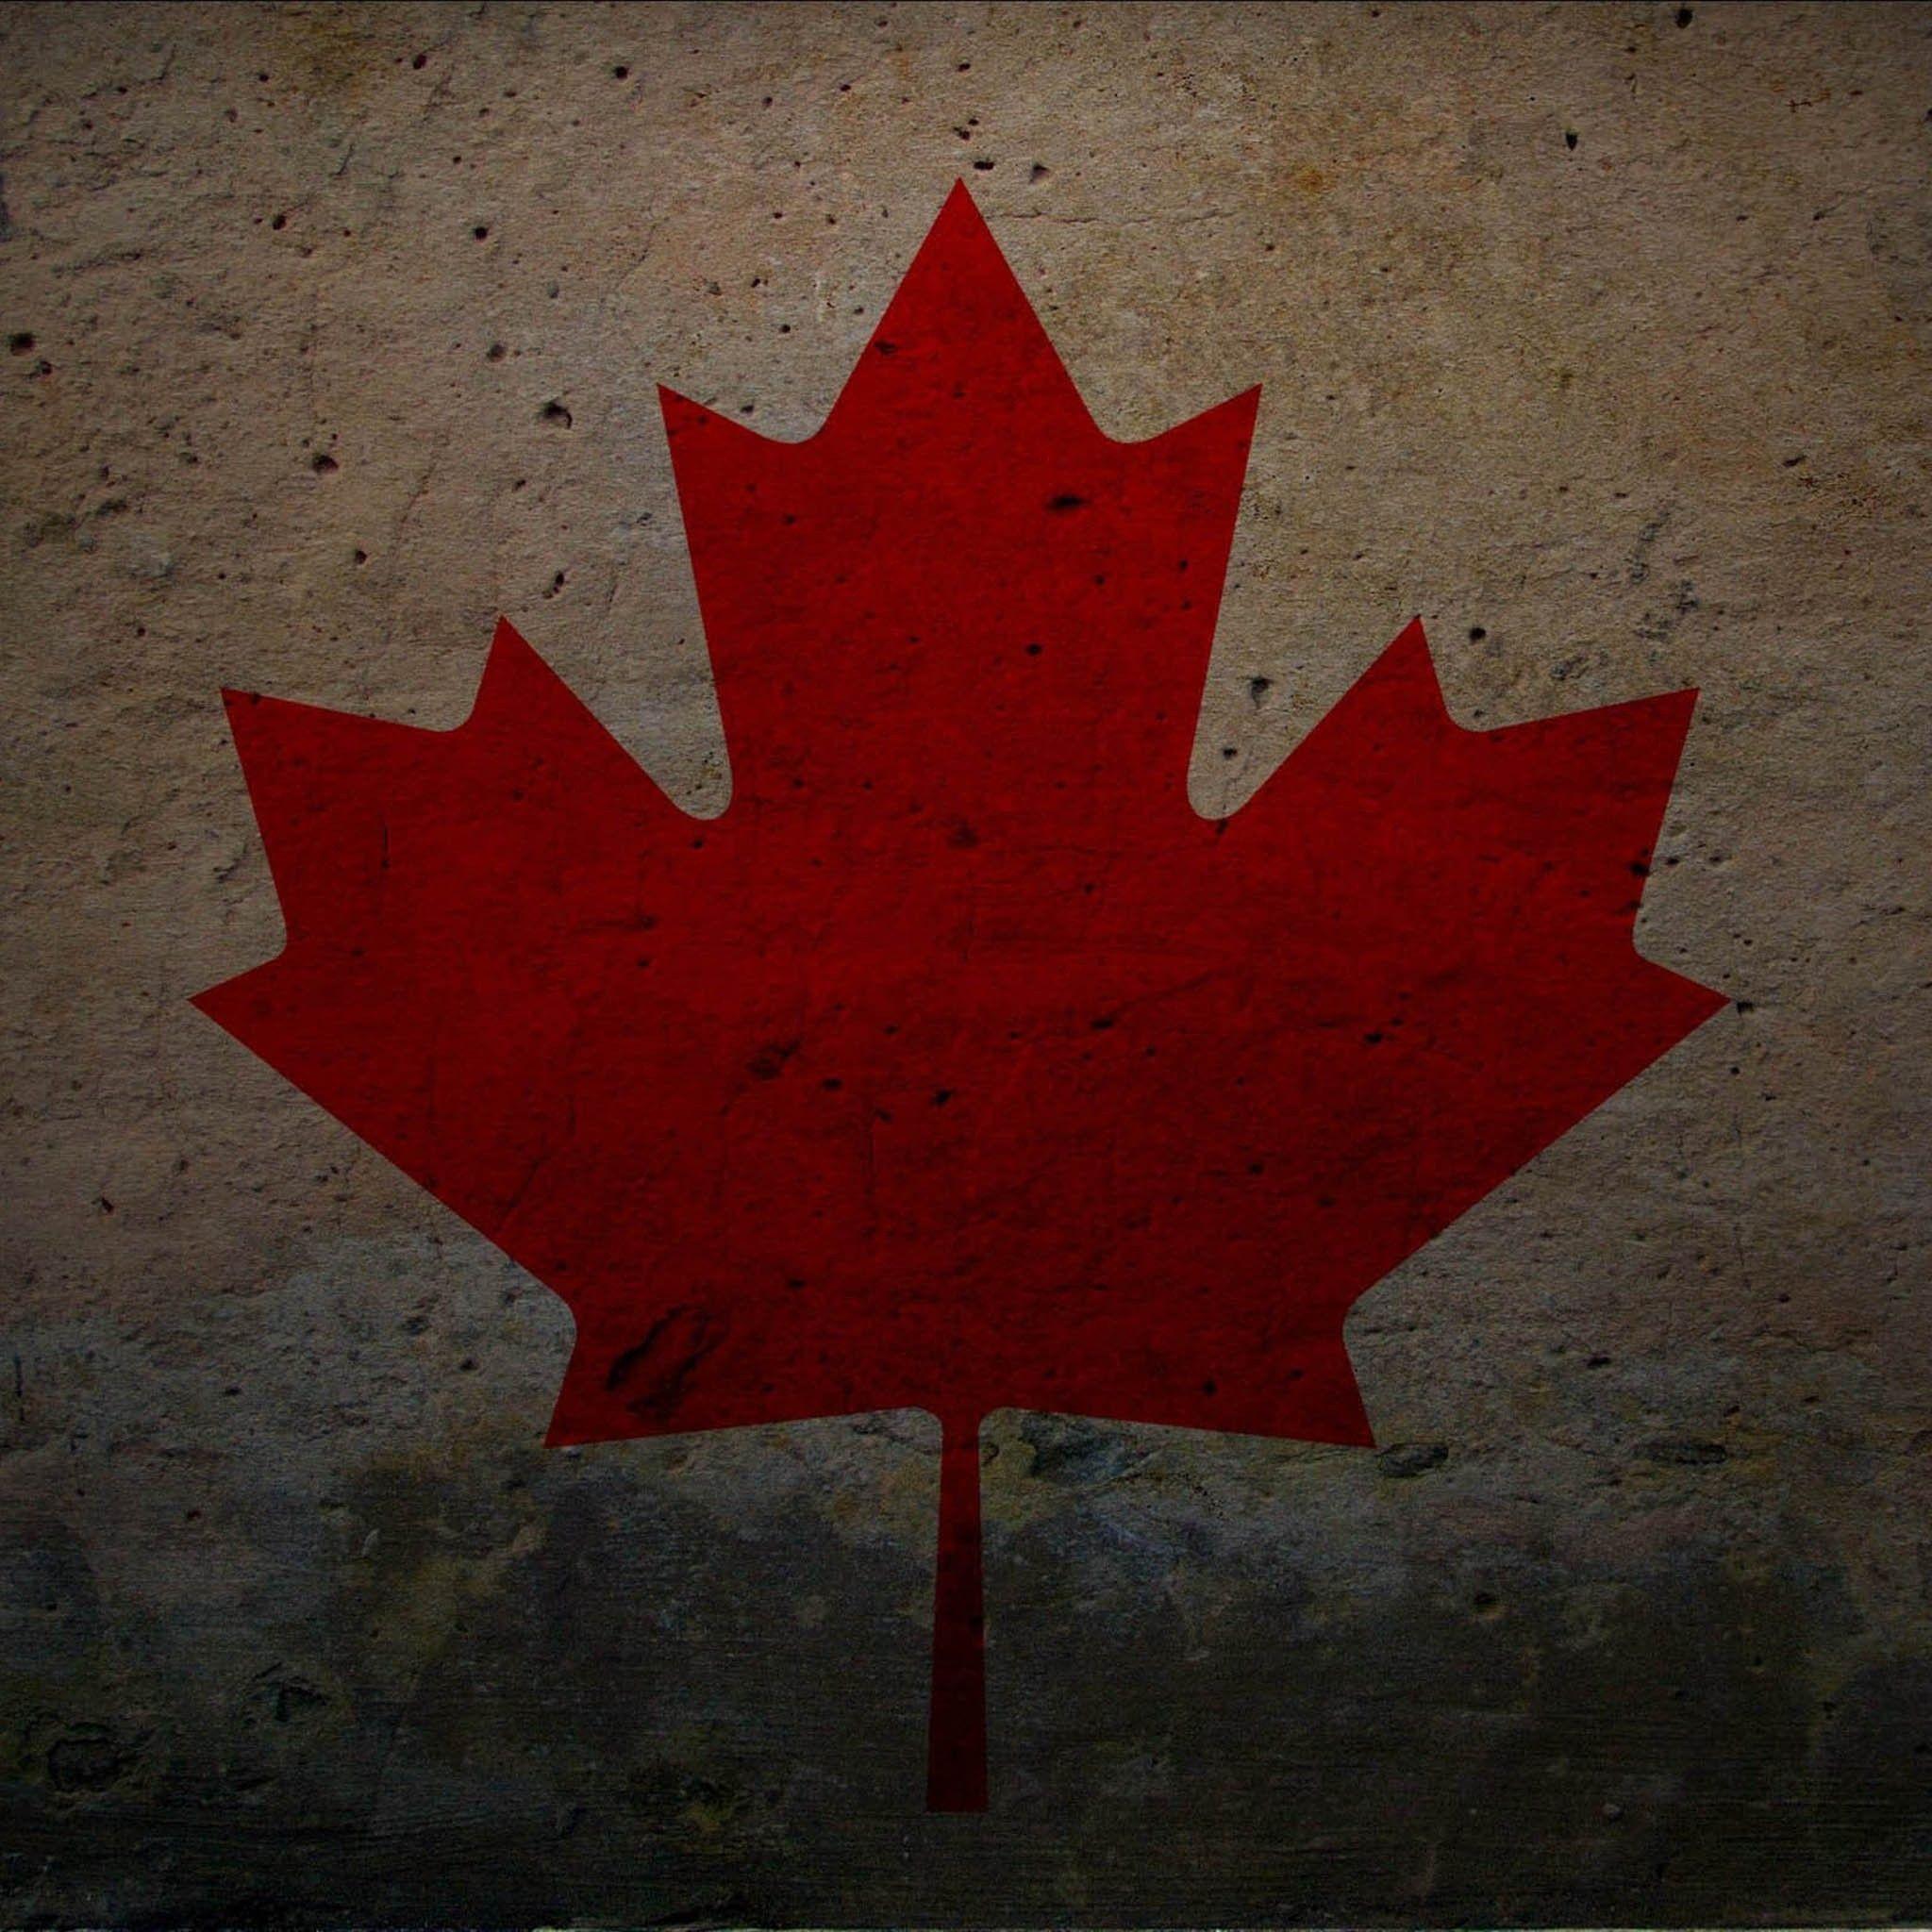 grunge flag of canada 2048x2048 ipad wallpaper and background